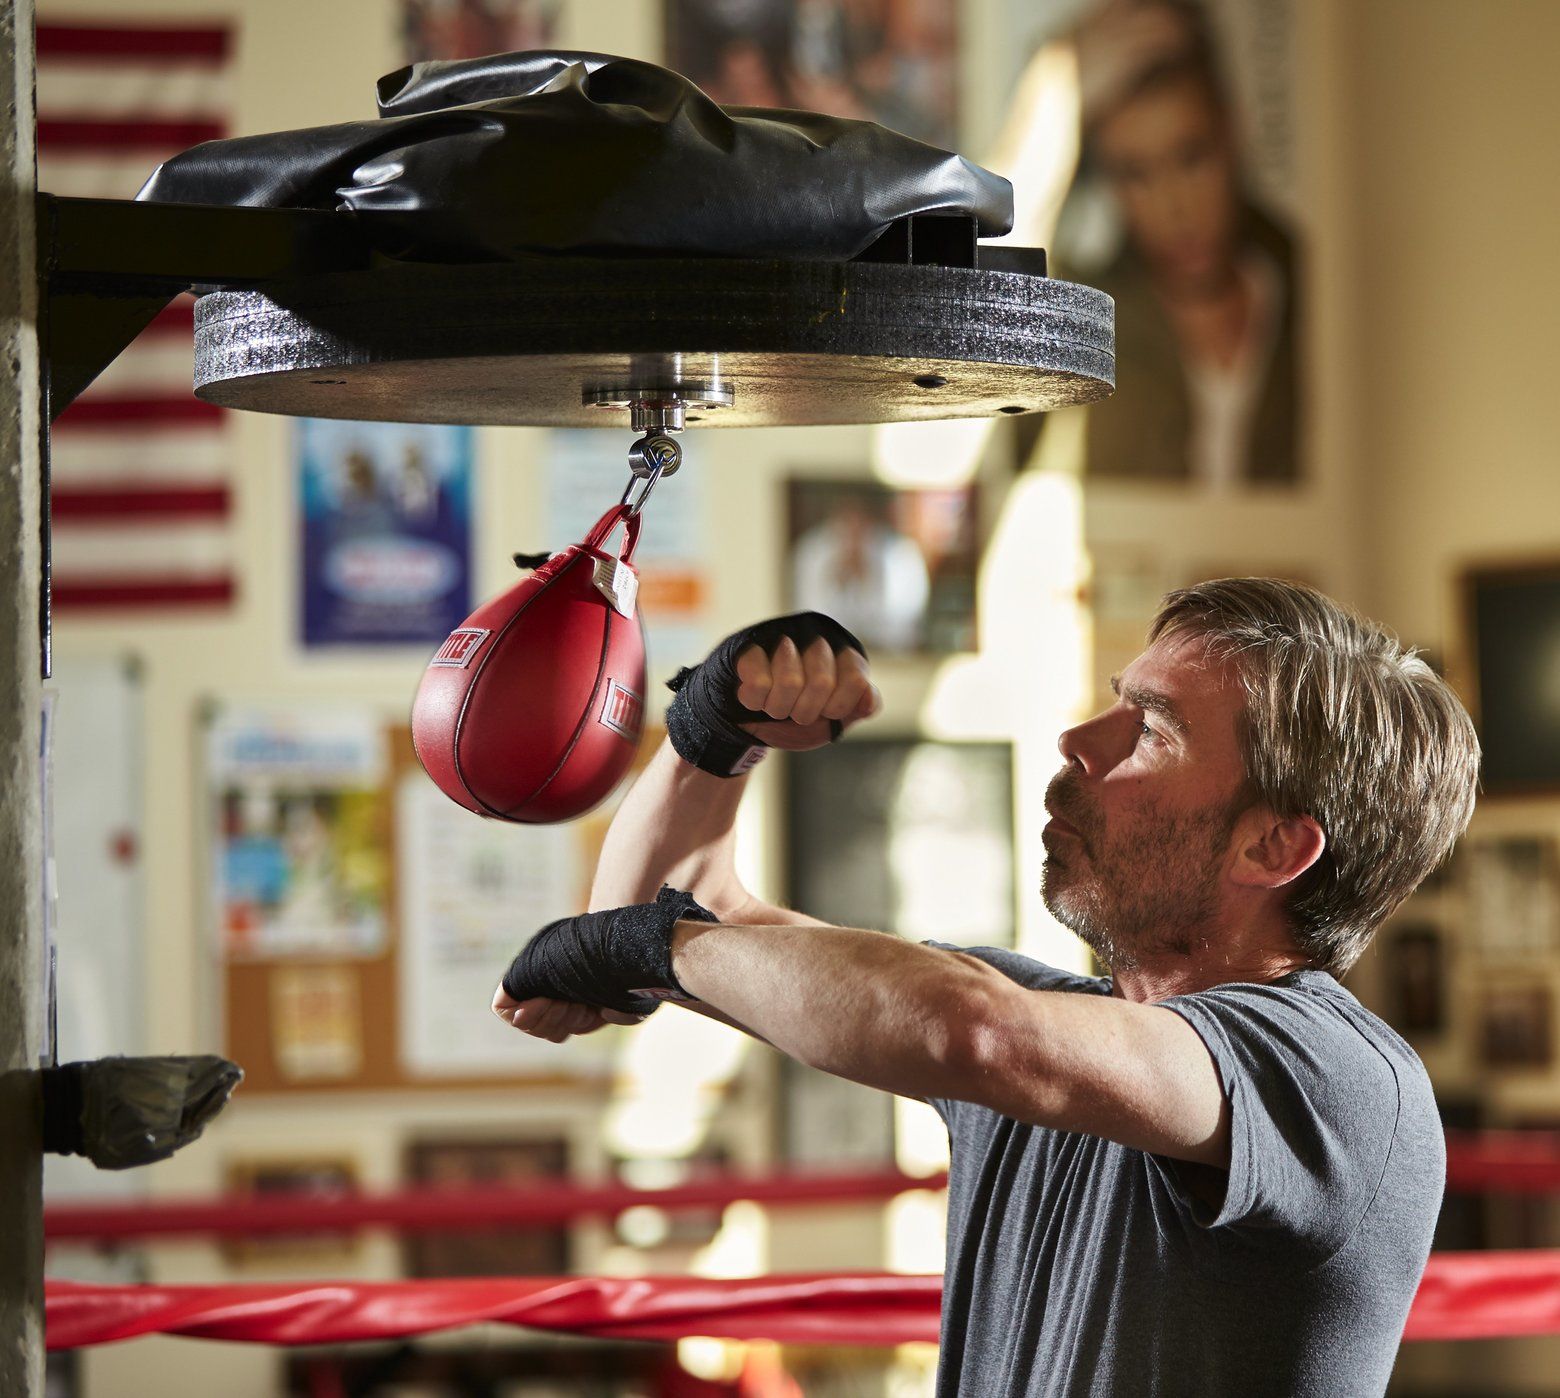 Boxing classes serve as therapy for those with Parkinsons.